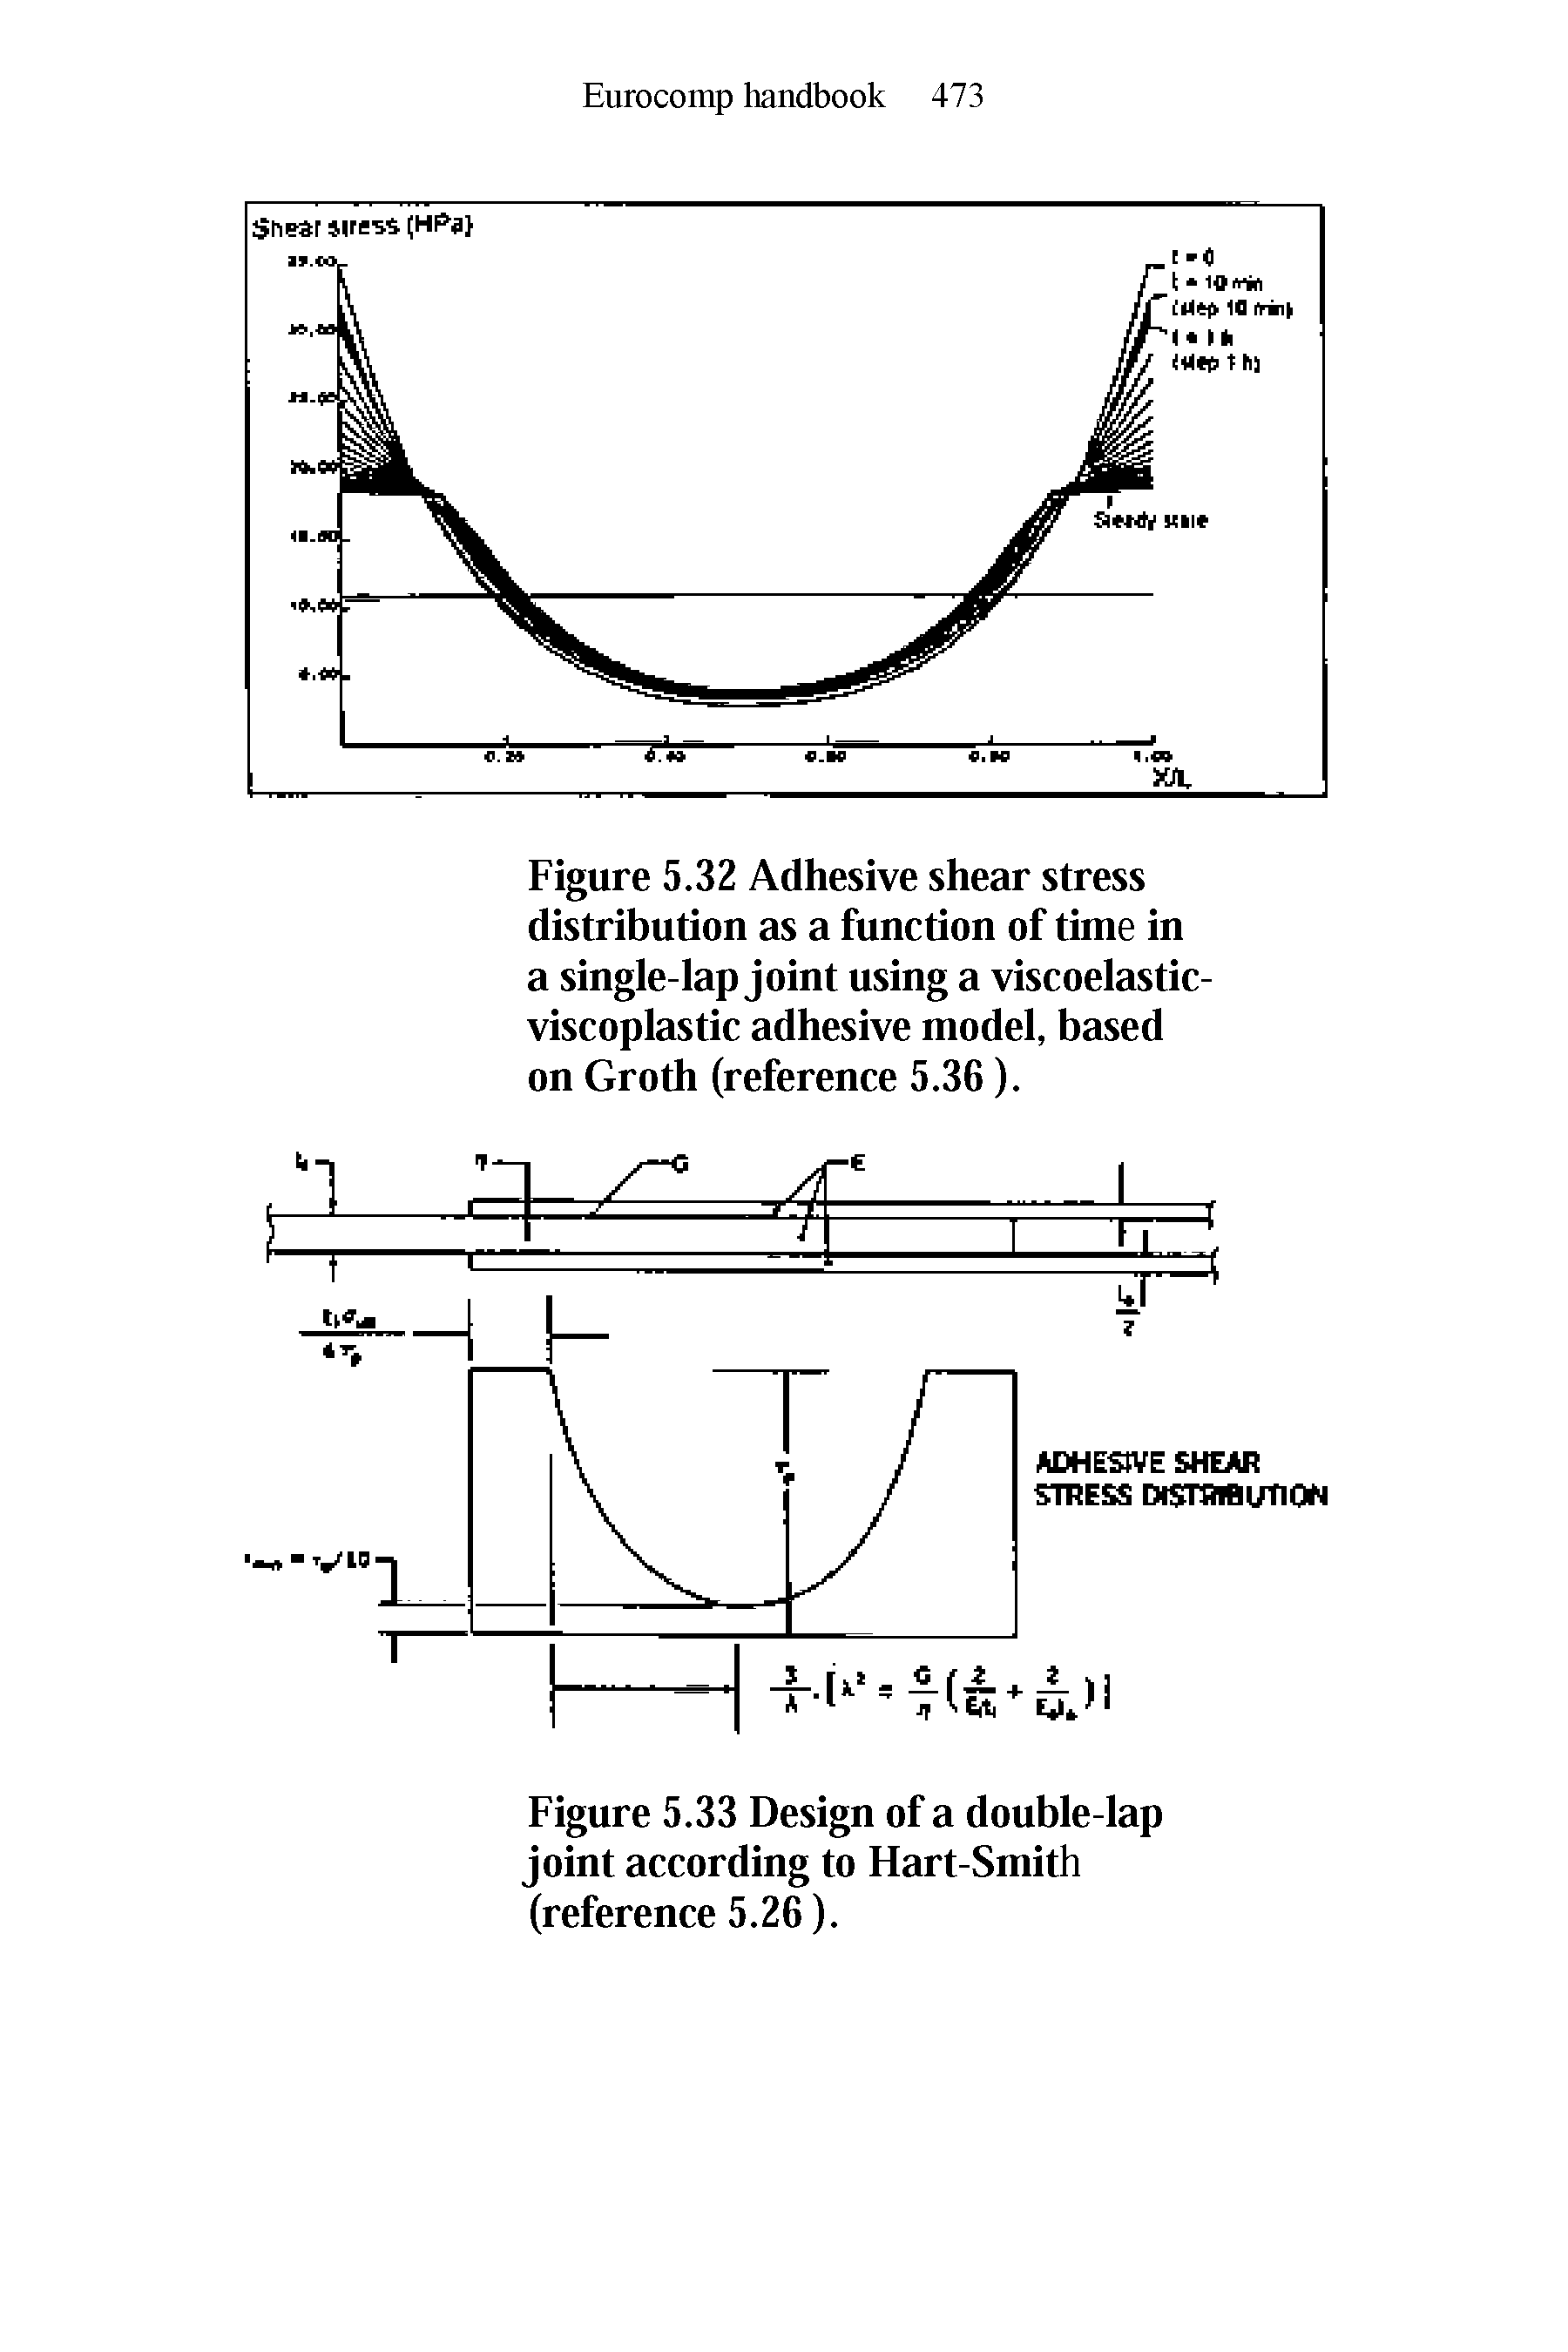 Figure 5.32 Adhesive shear stress distribution as a function of time in a single-lap joint using a viscoelastic-viscoplastic adhesive model, based on Groth (reference 5.36).